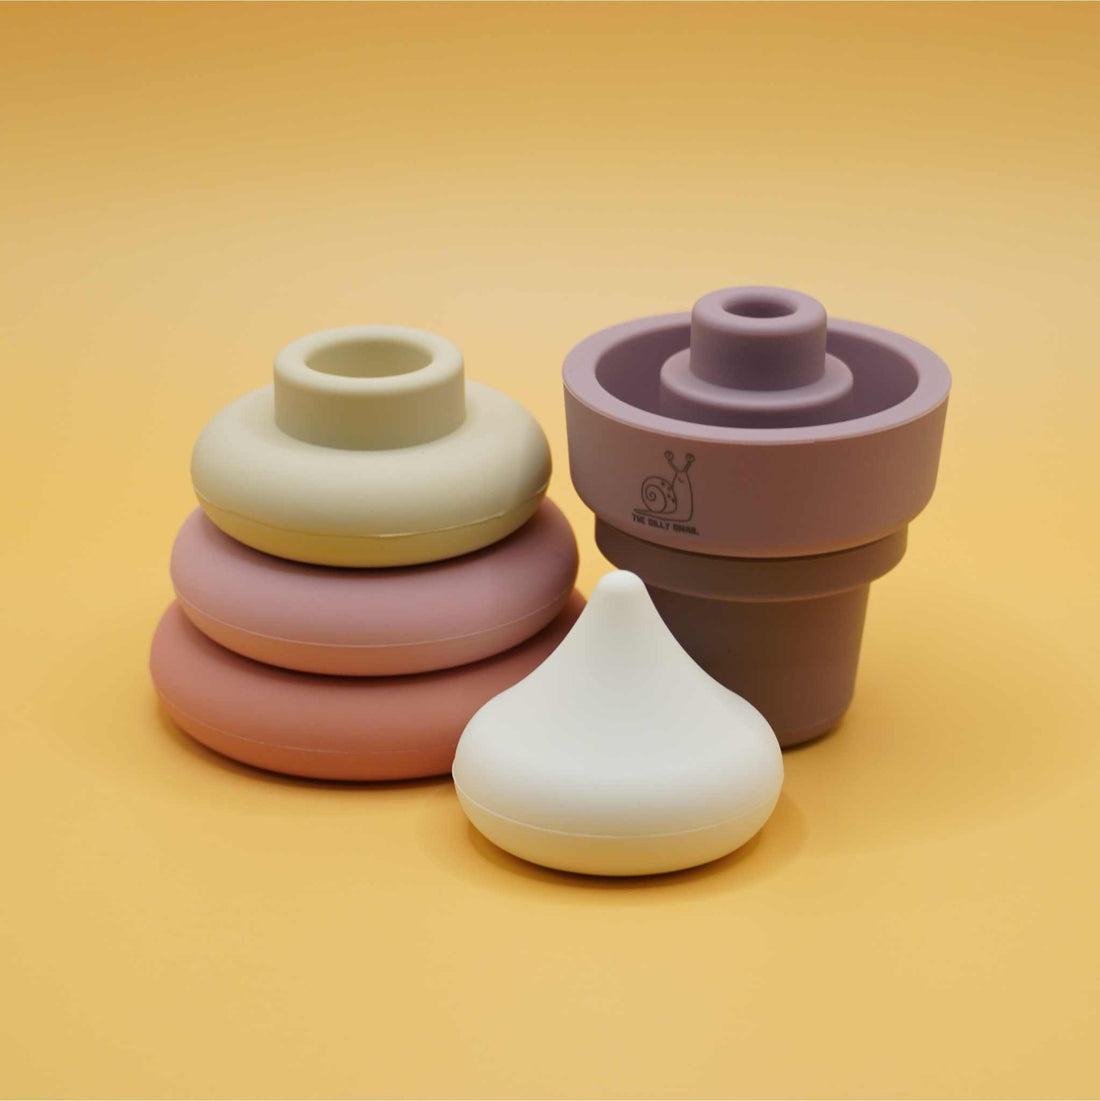 Irresistible Ice Cream Silicone Stacking Toy pieces apart